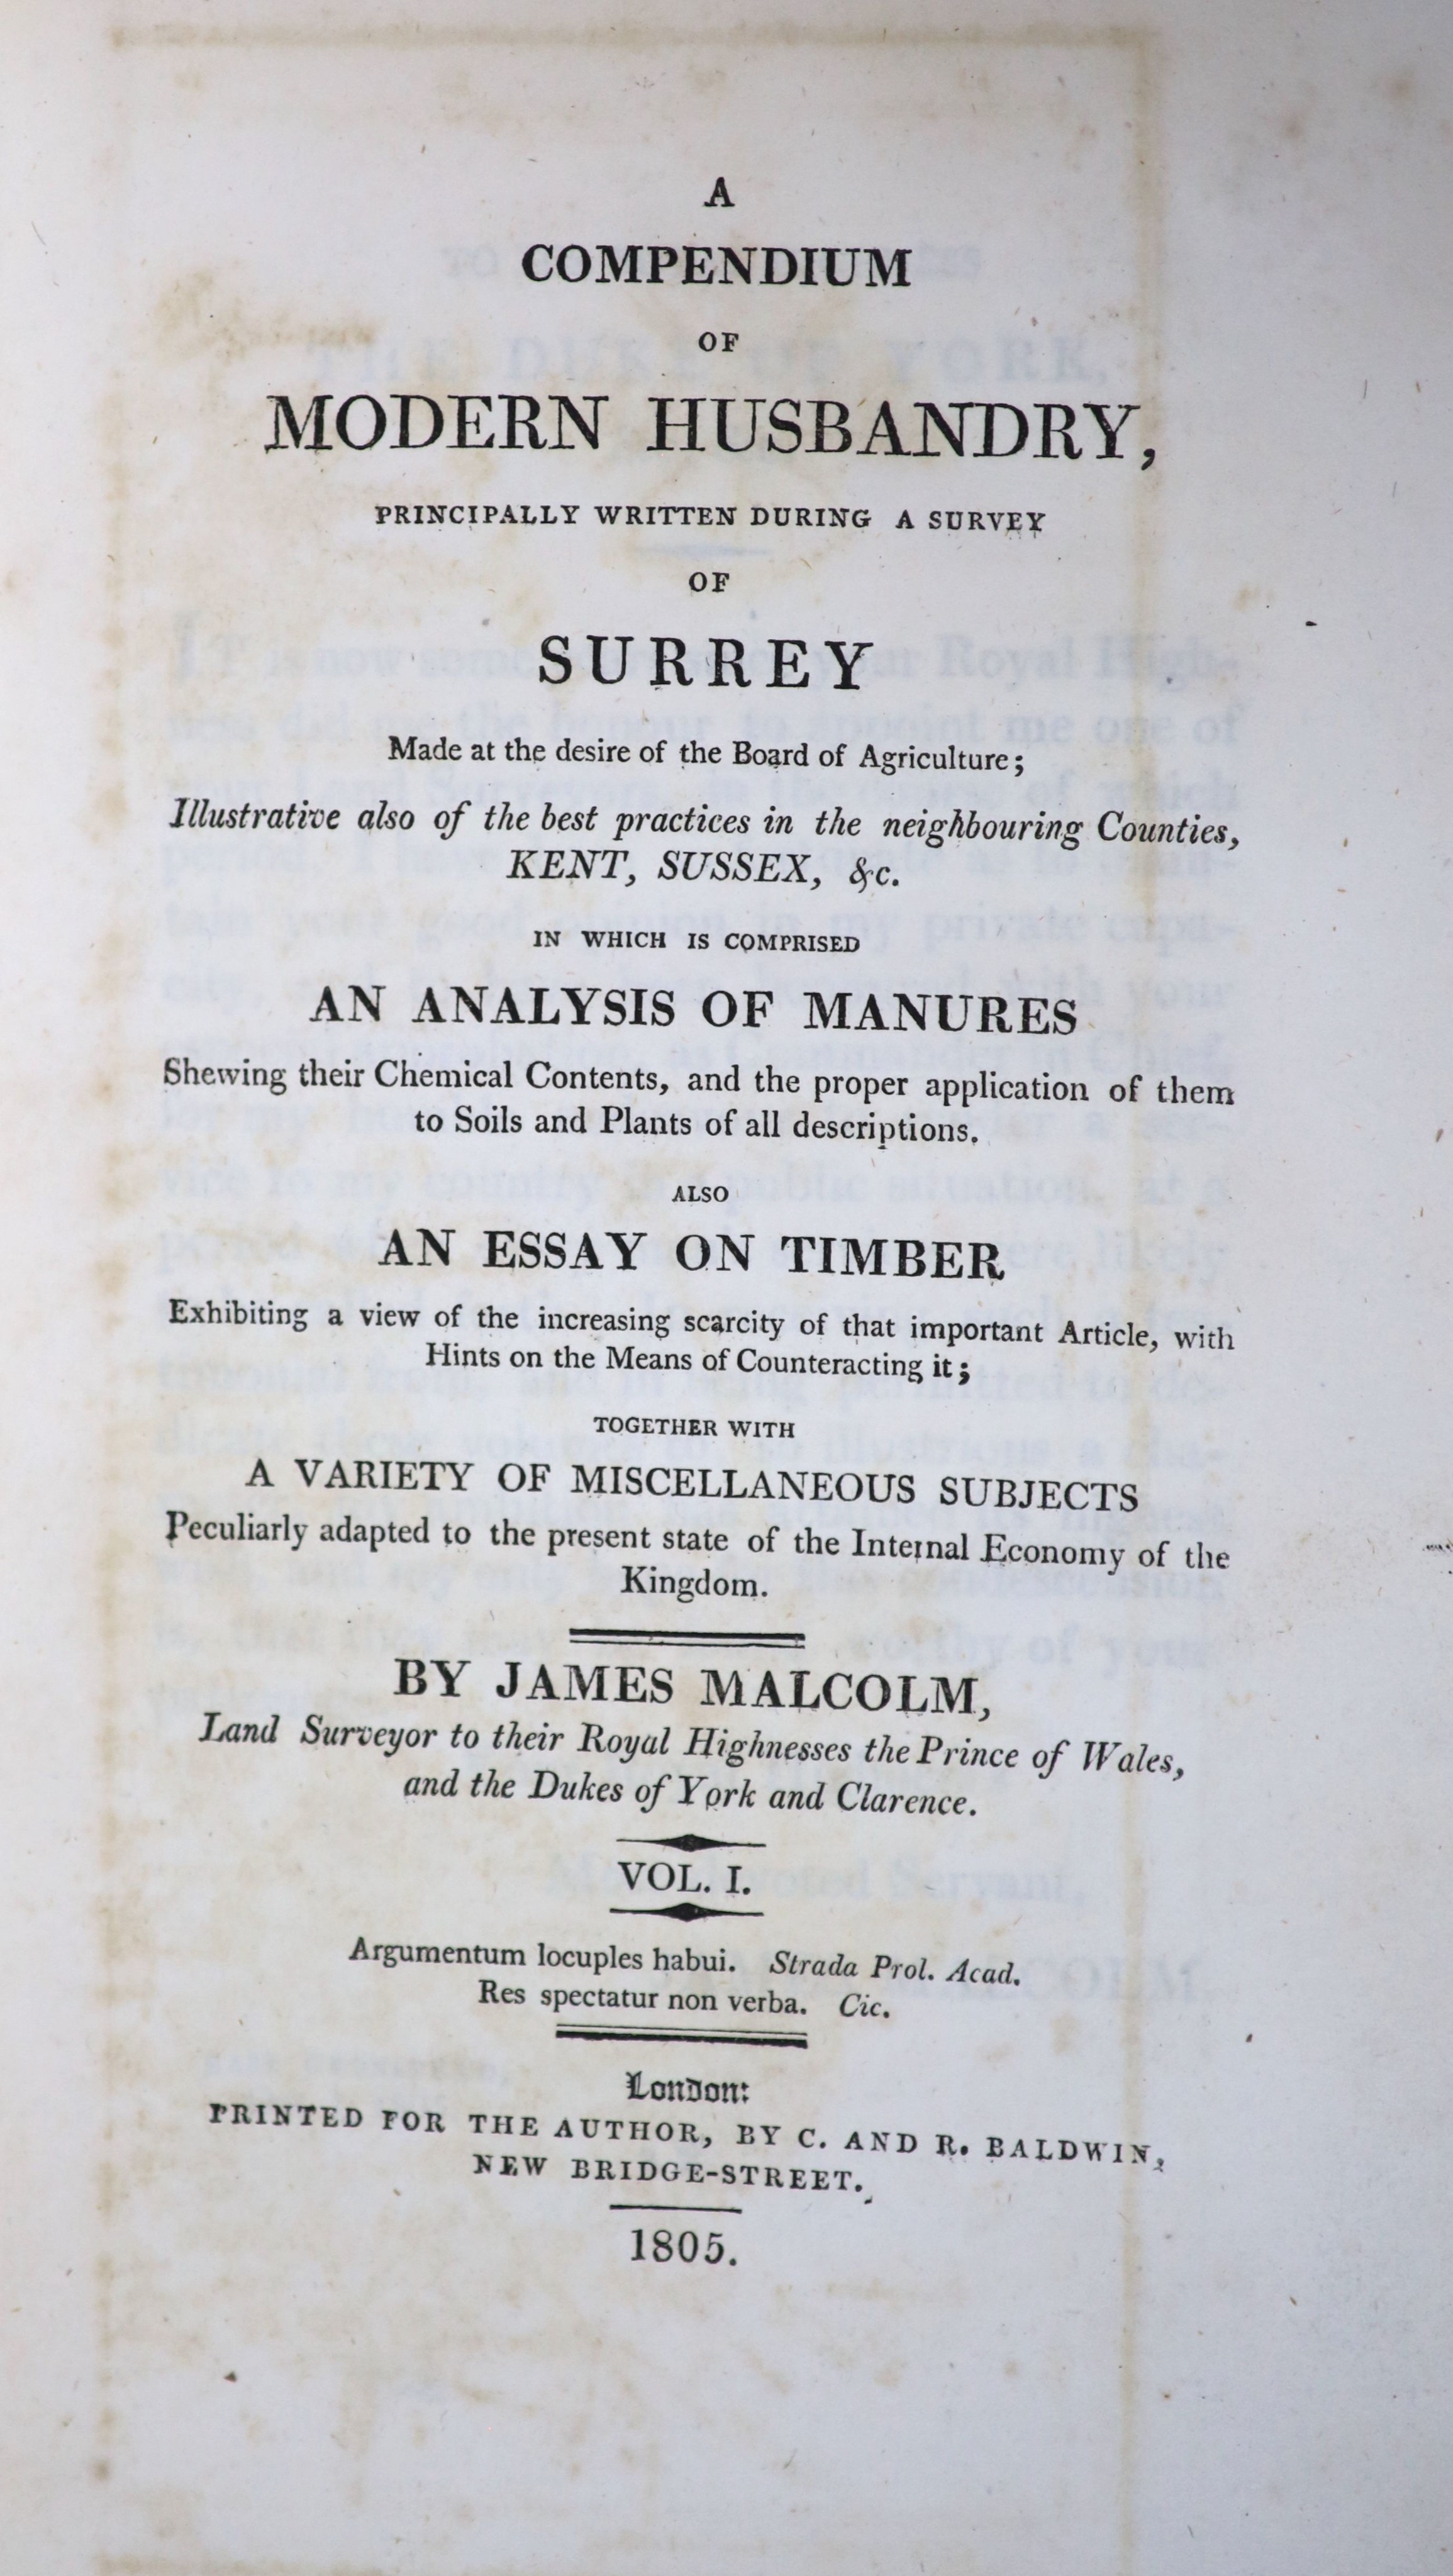 Malcolm, James - A Compendium of Modern Husbandry, Principally written during a Survey of Surrey, 3 vols, 8vo, half calf, spines brittle and with loss, with folding coloured map and 7 plates, London, 1805